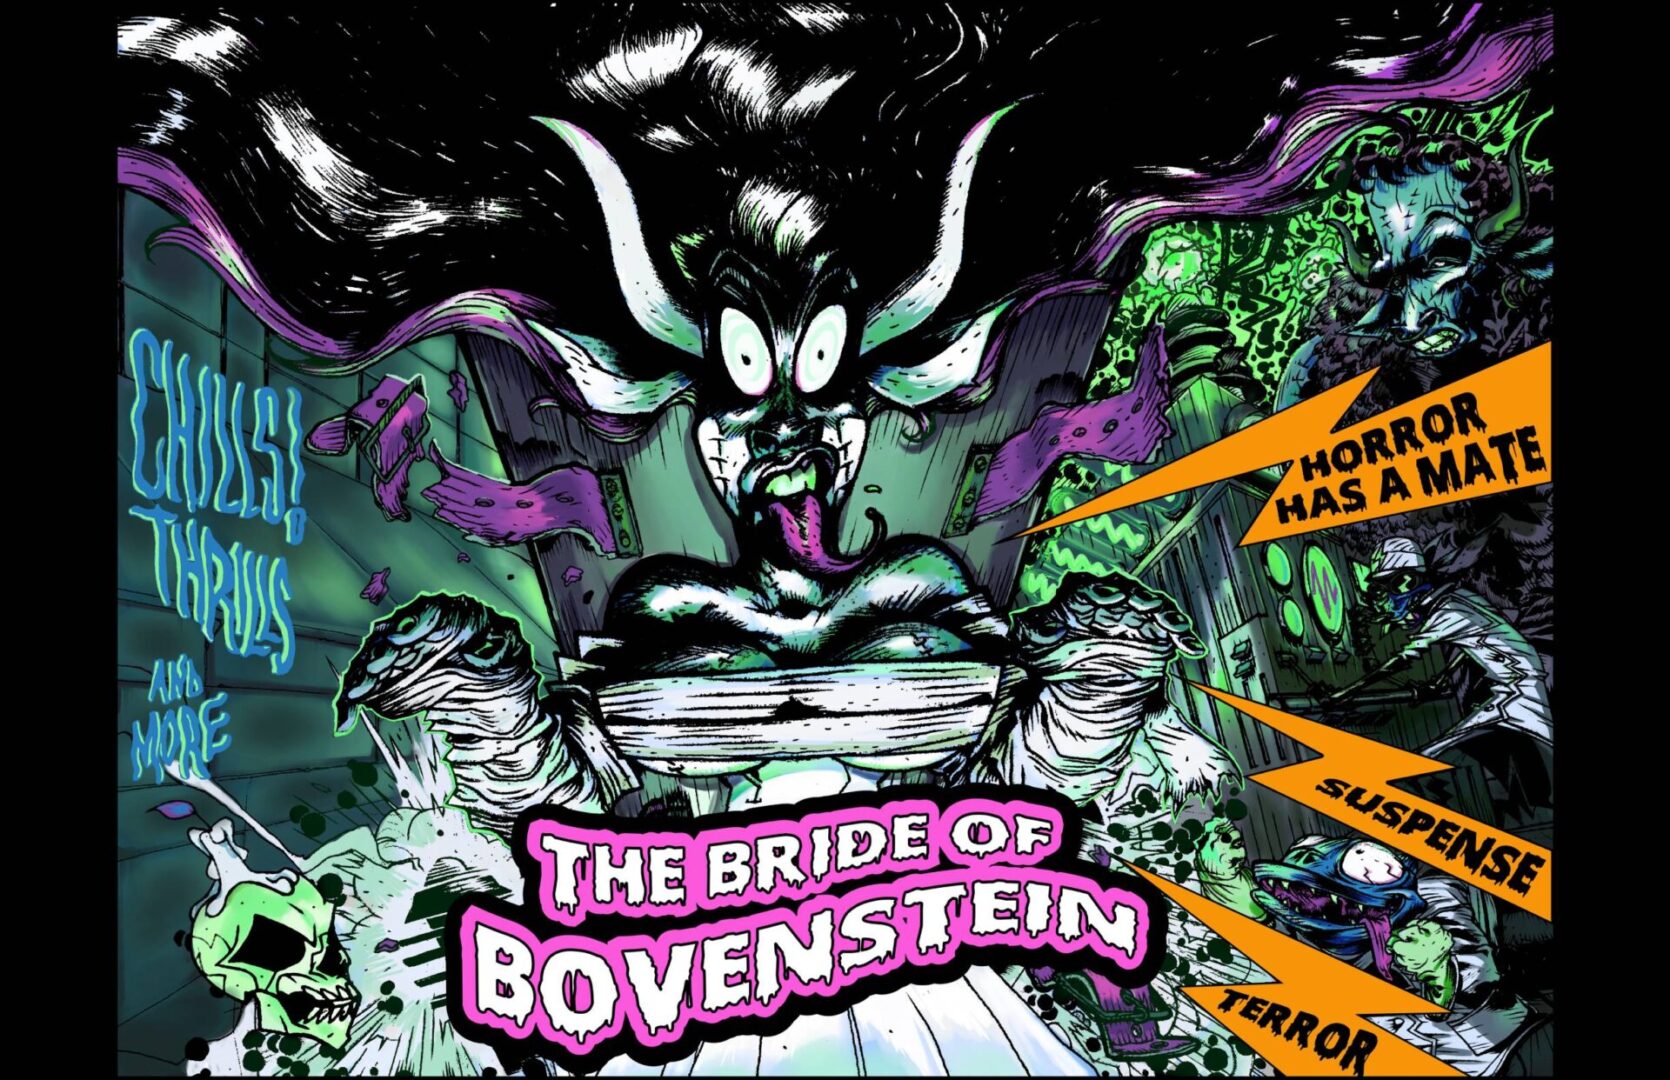 A poster of the bride of bovenstein